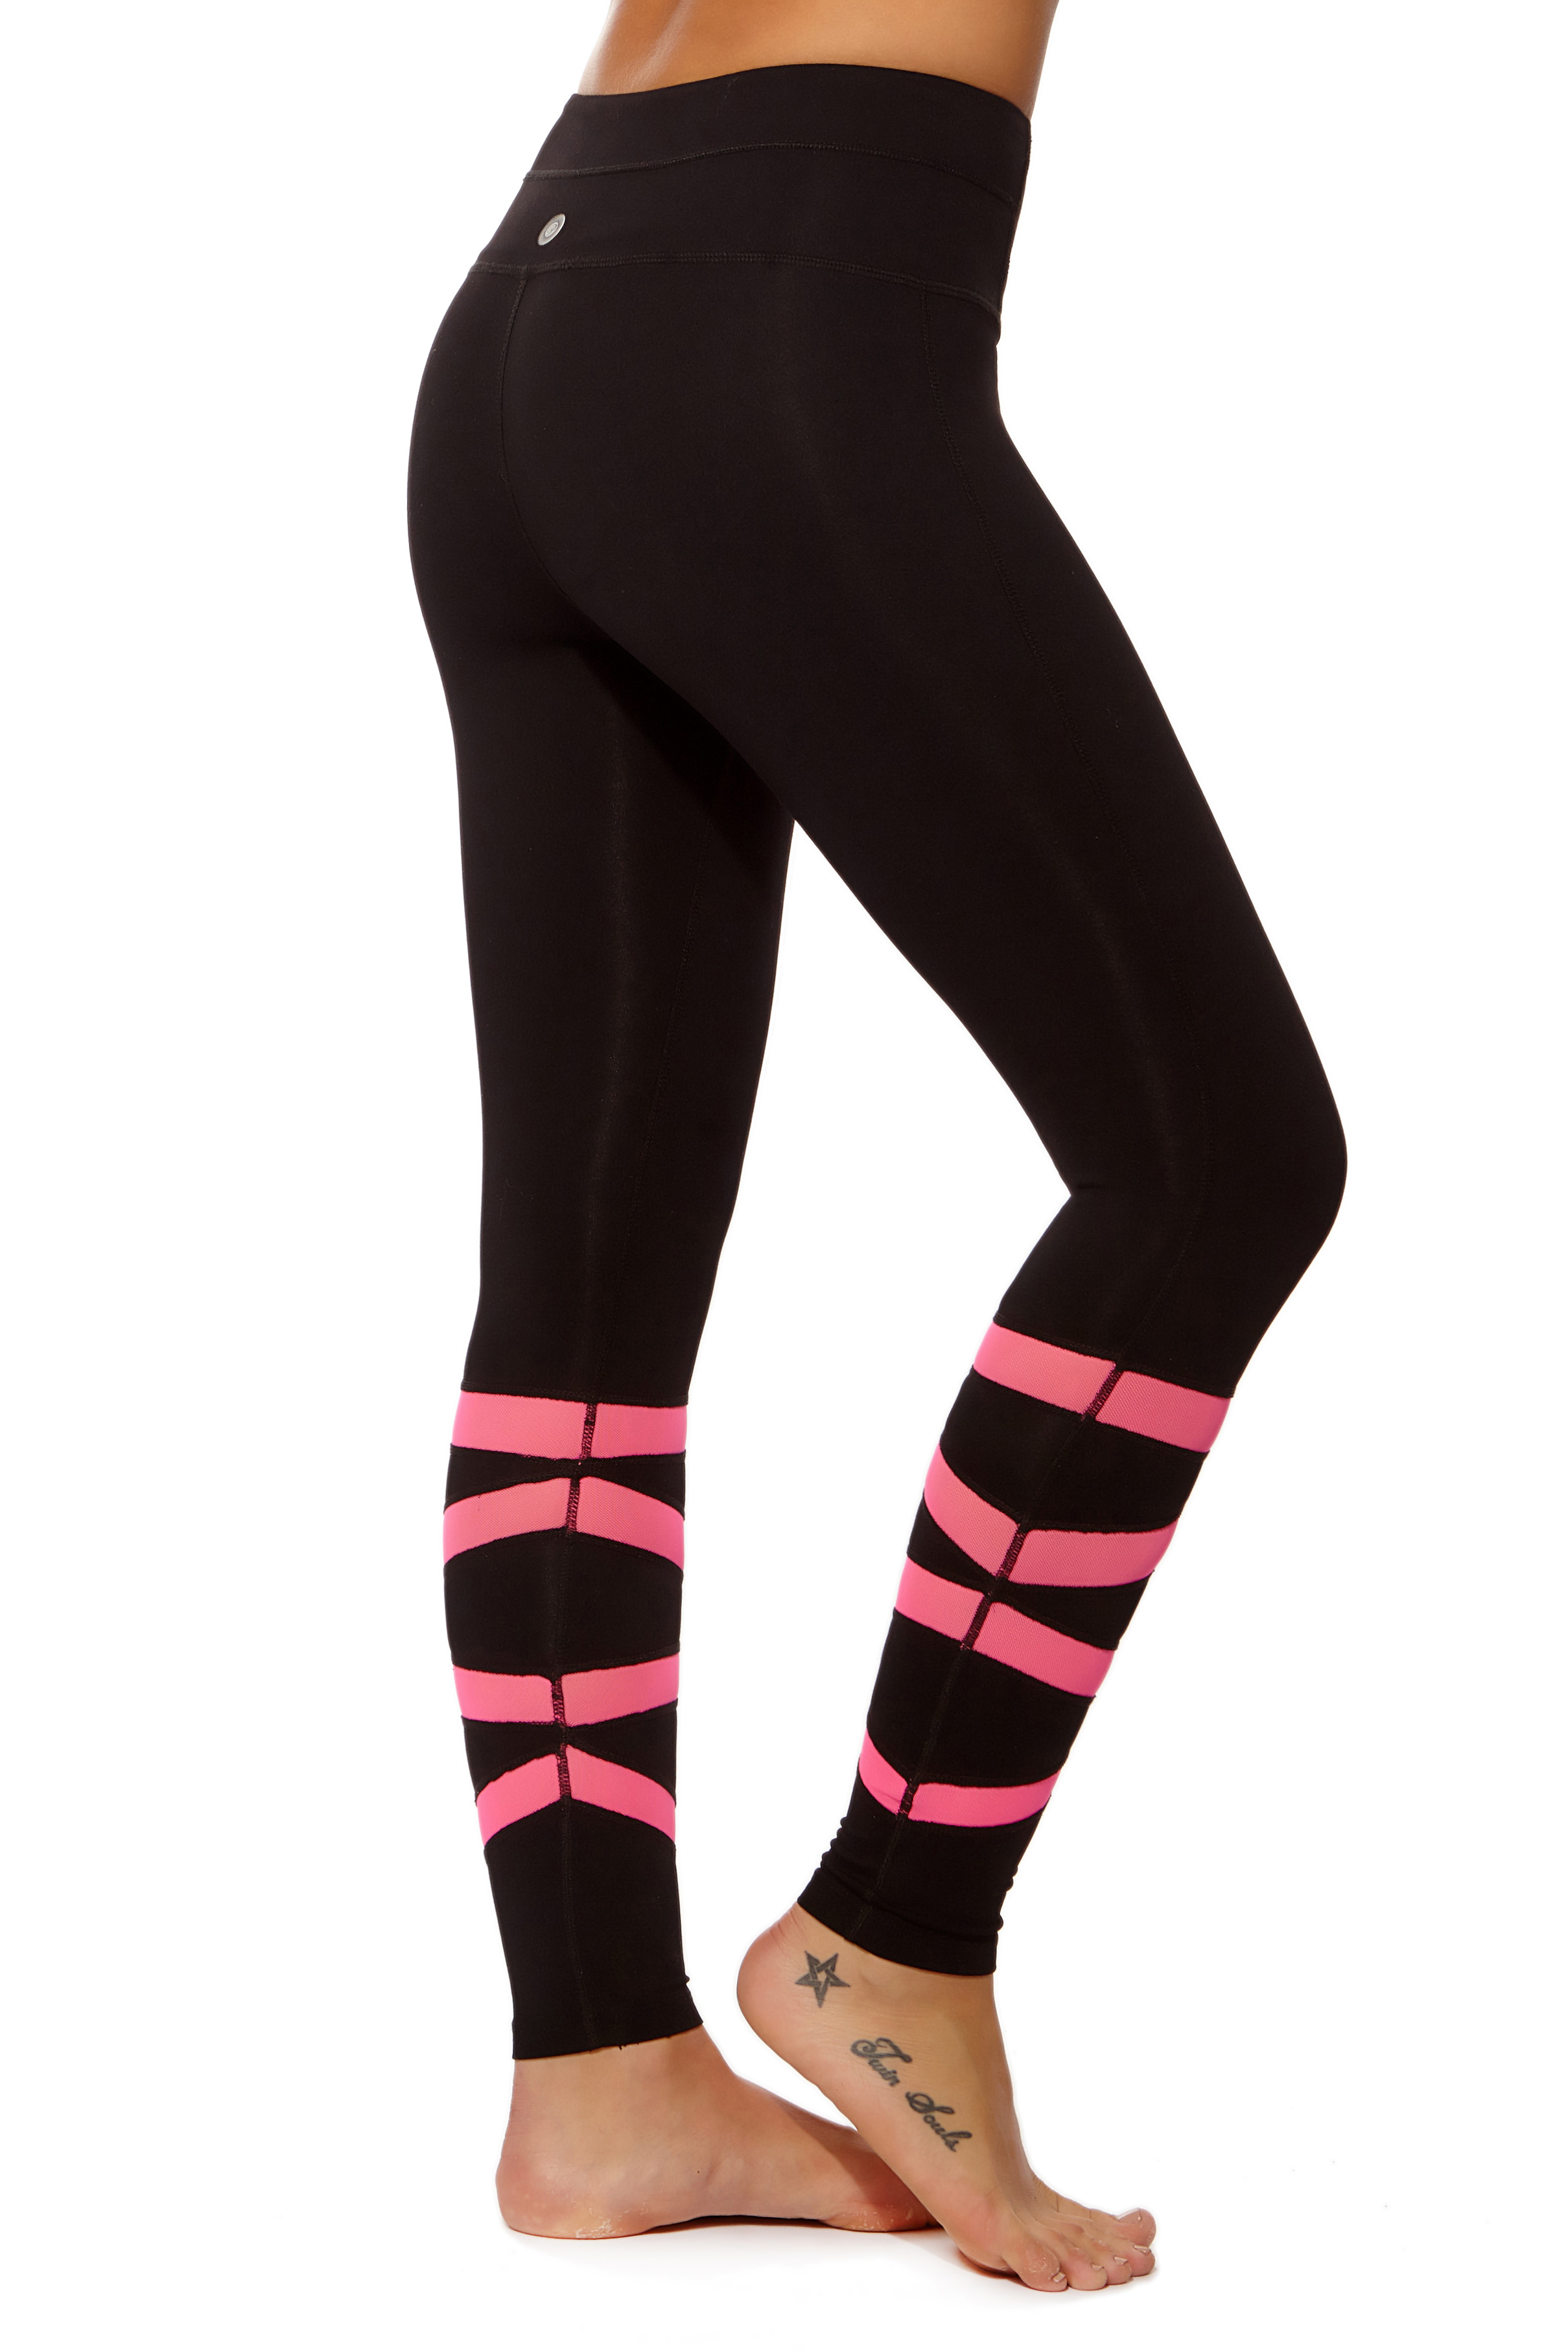 Form Fitting Leggings with Calf Zigzag Mesh in Neon Pink - prjon